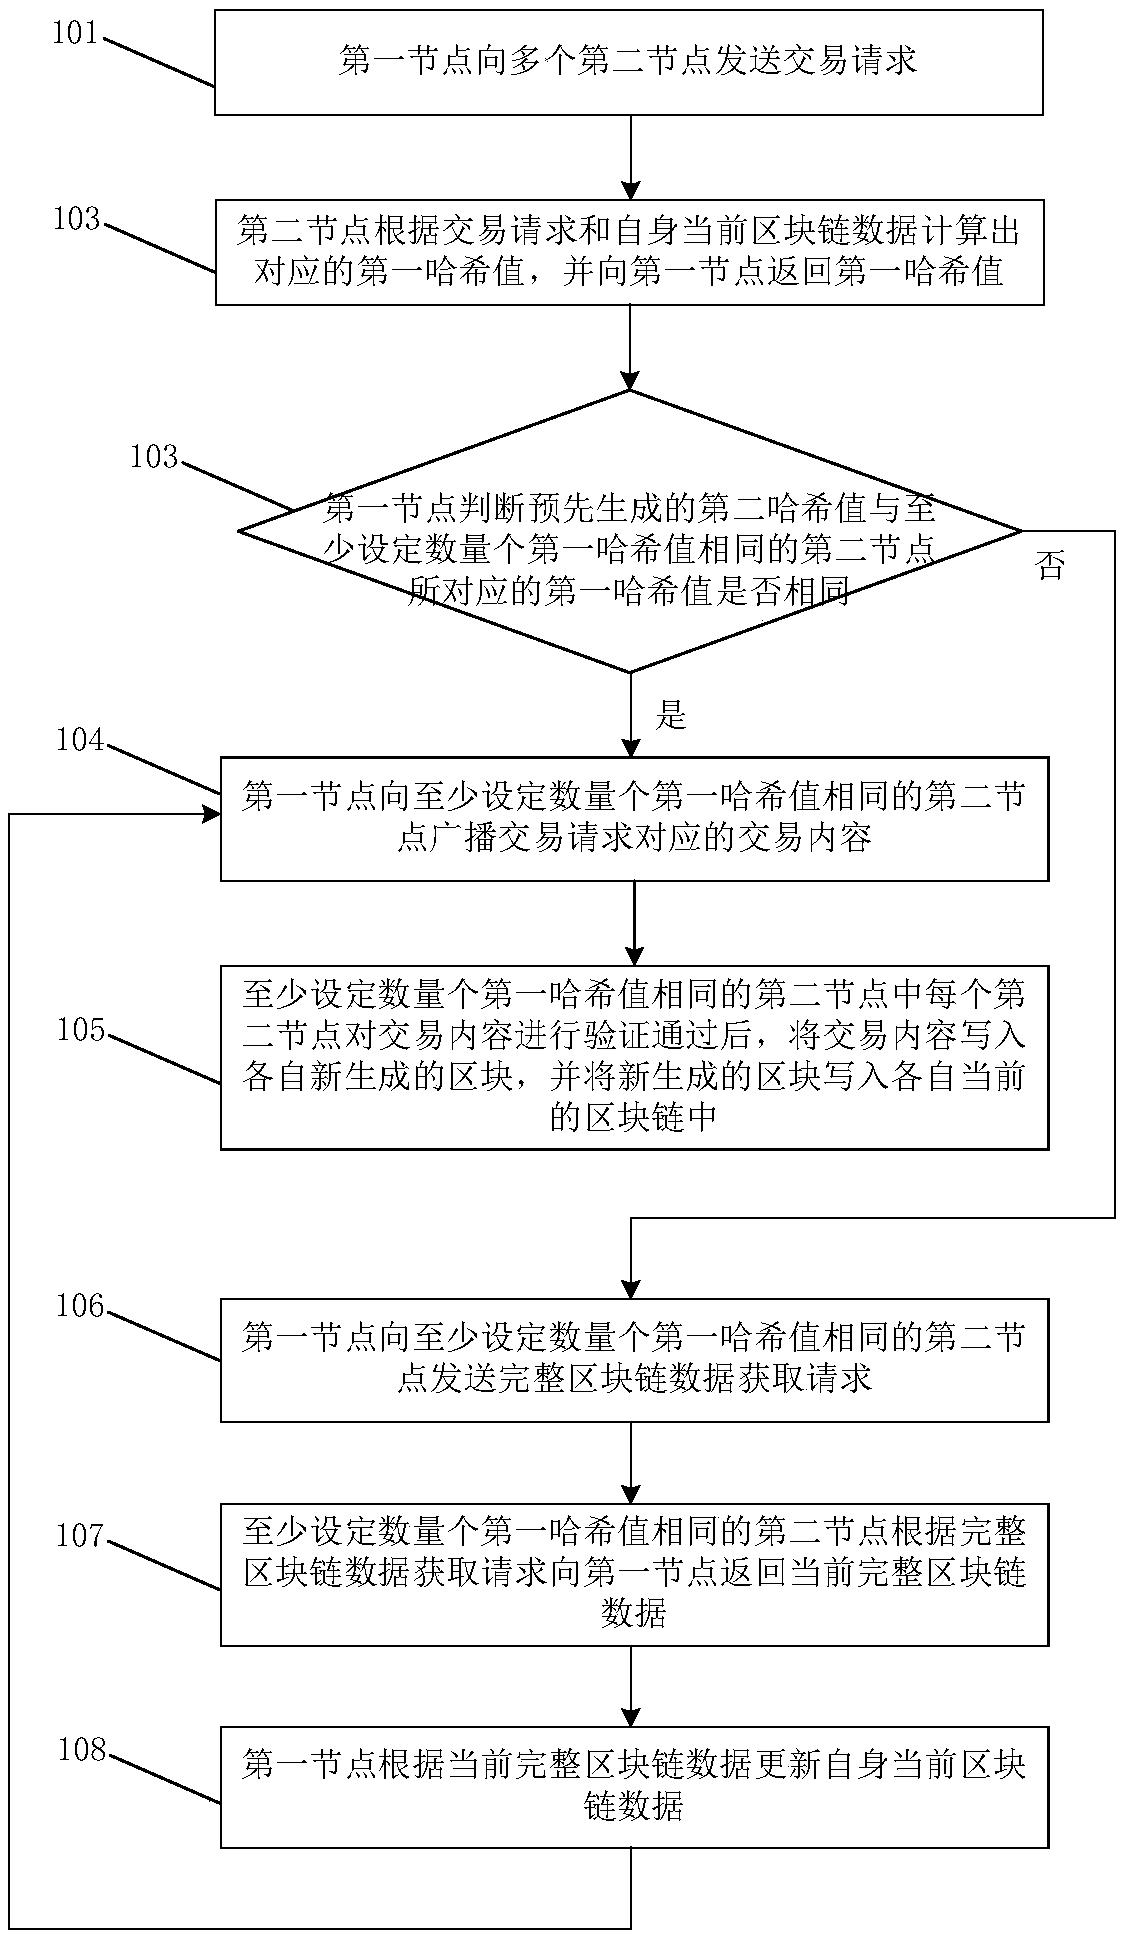 Transaction request processing method and system